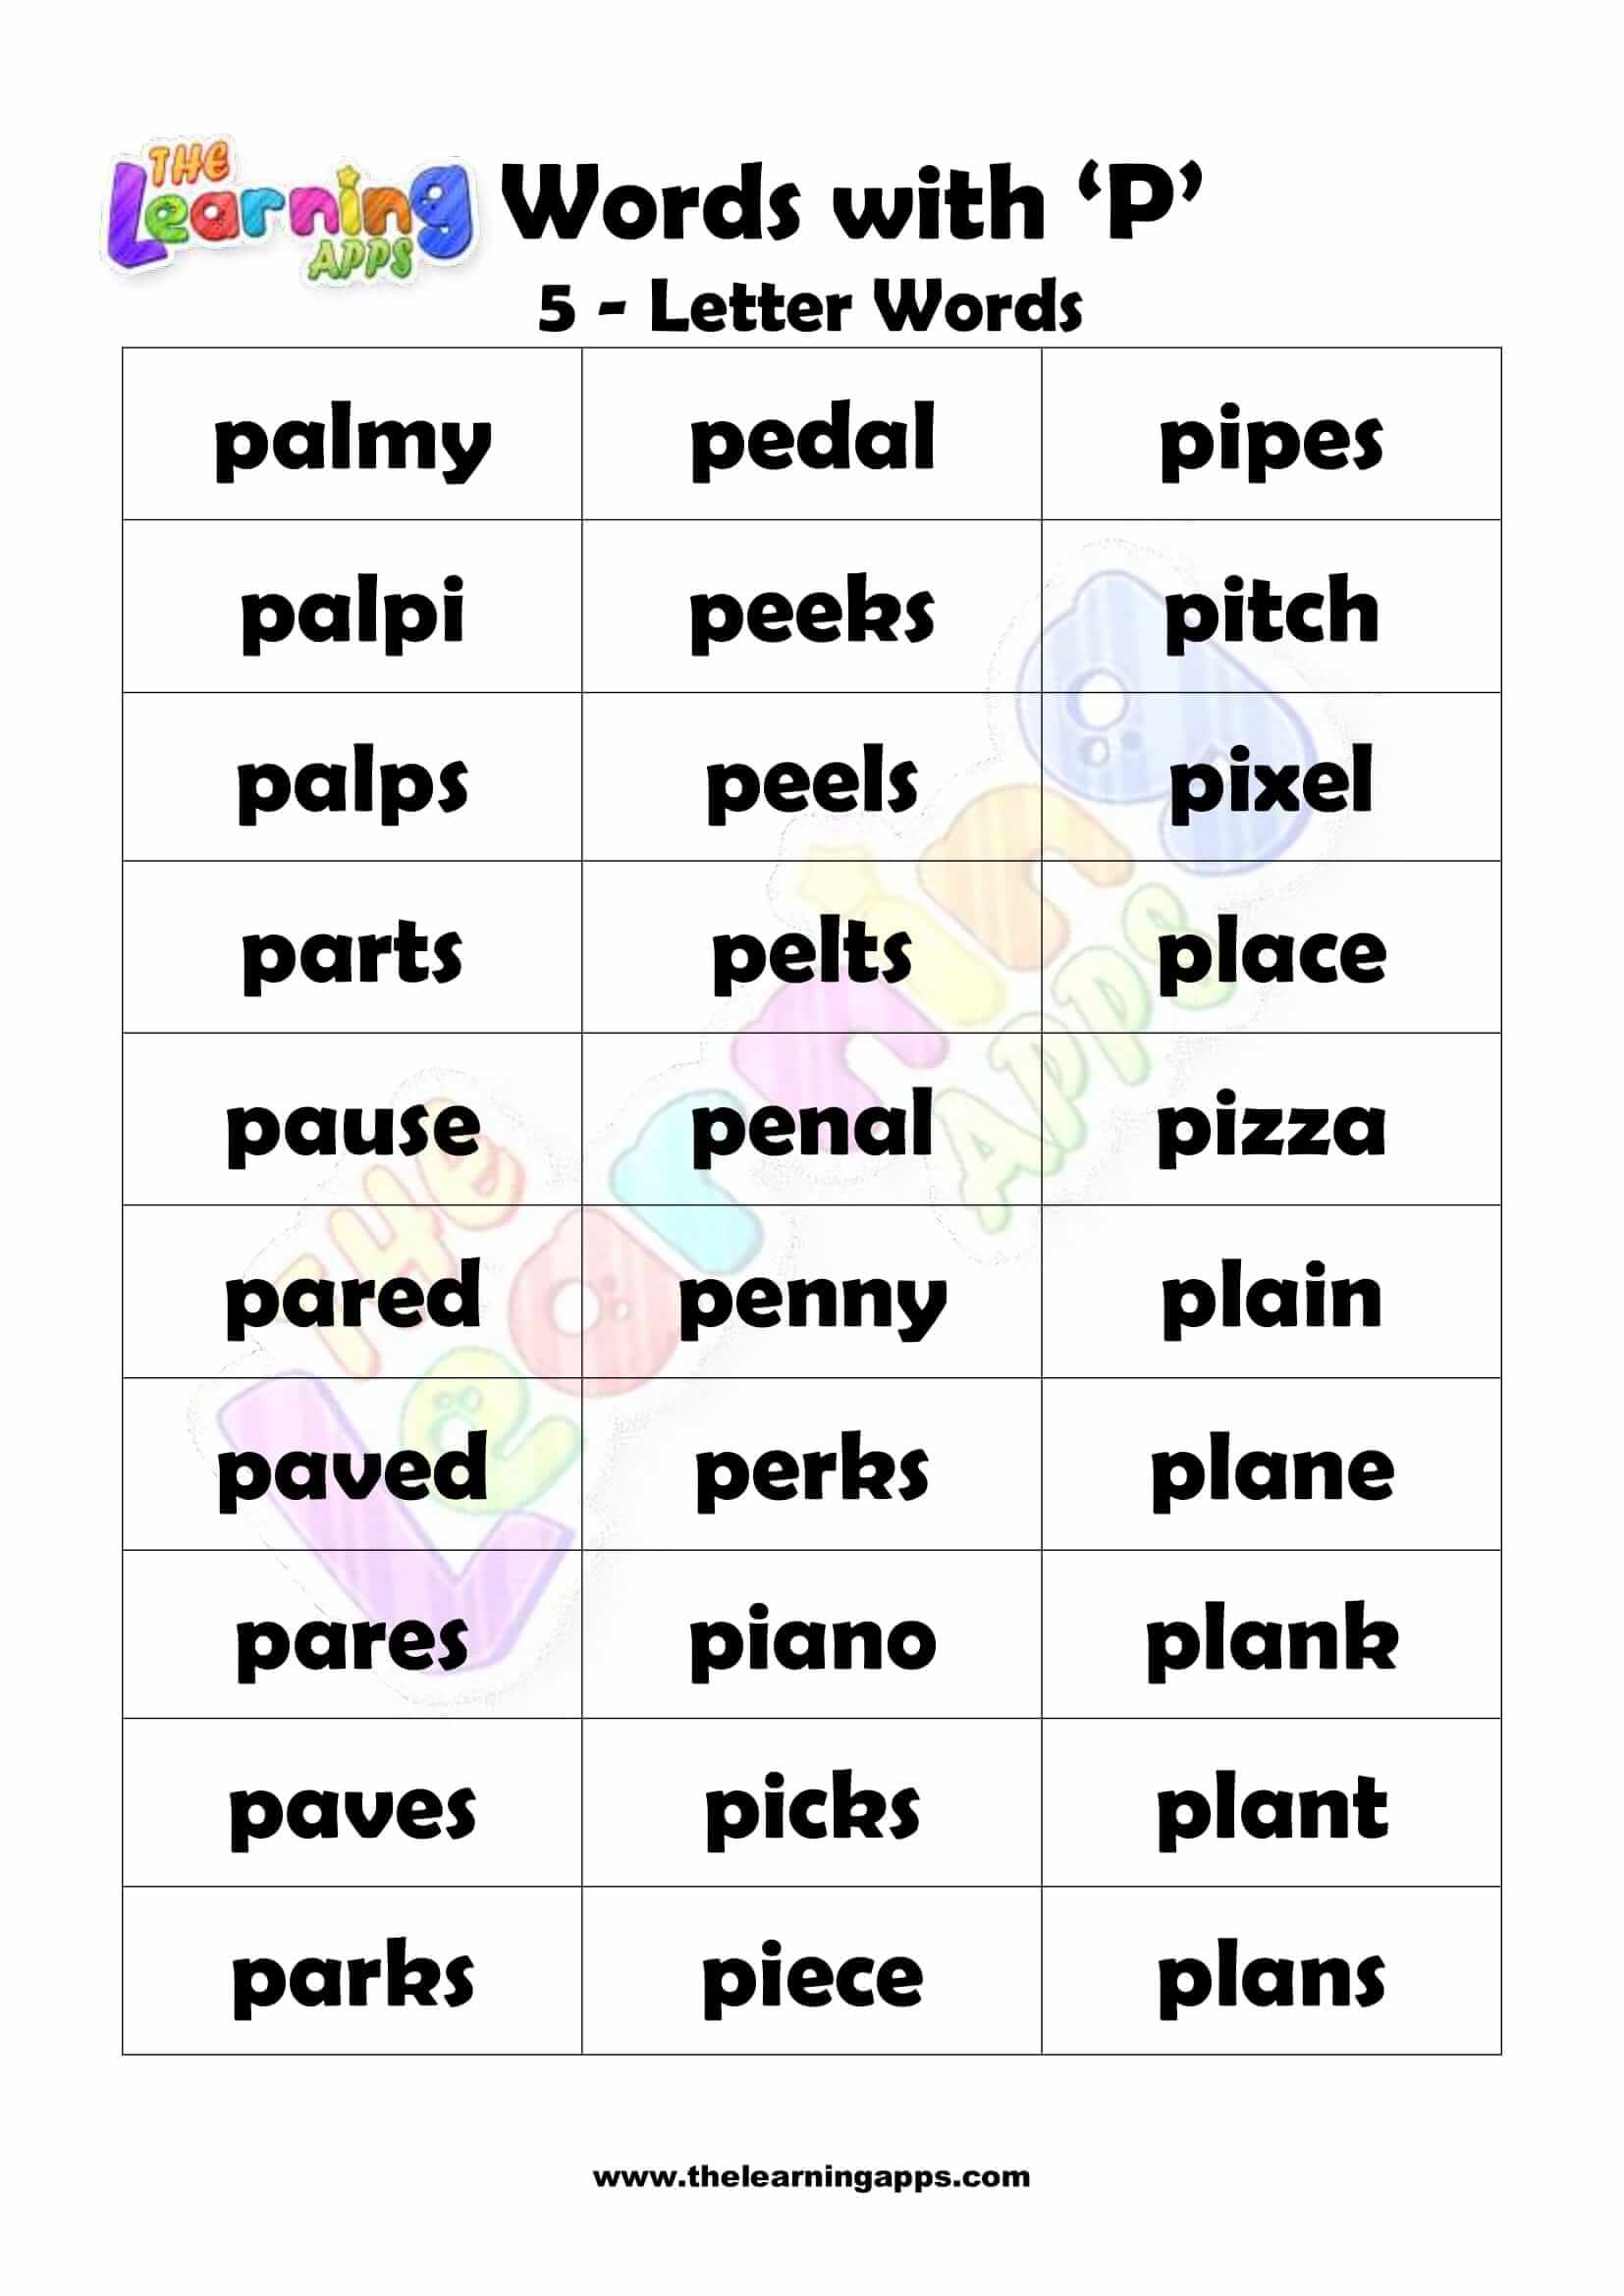 5 LETTER WORD STARTING WITH P-3